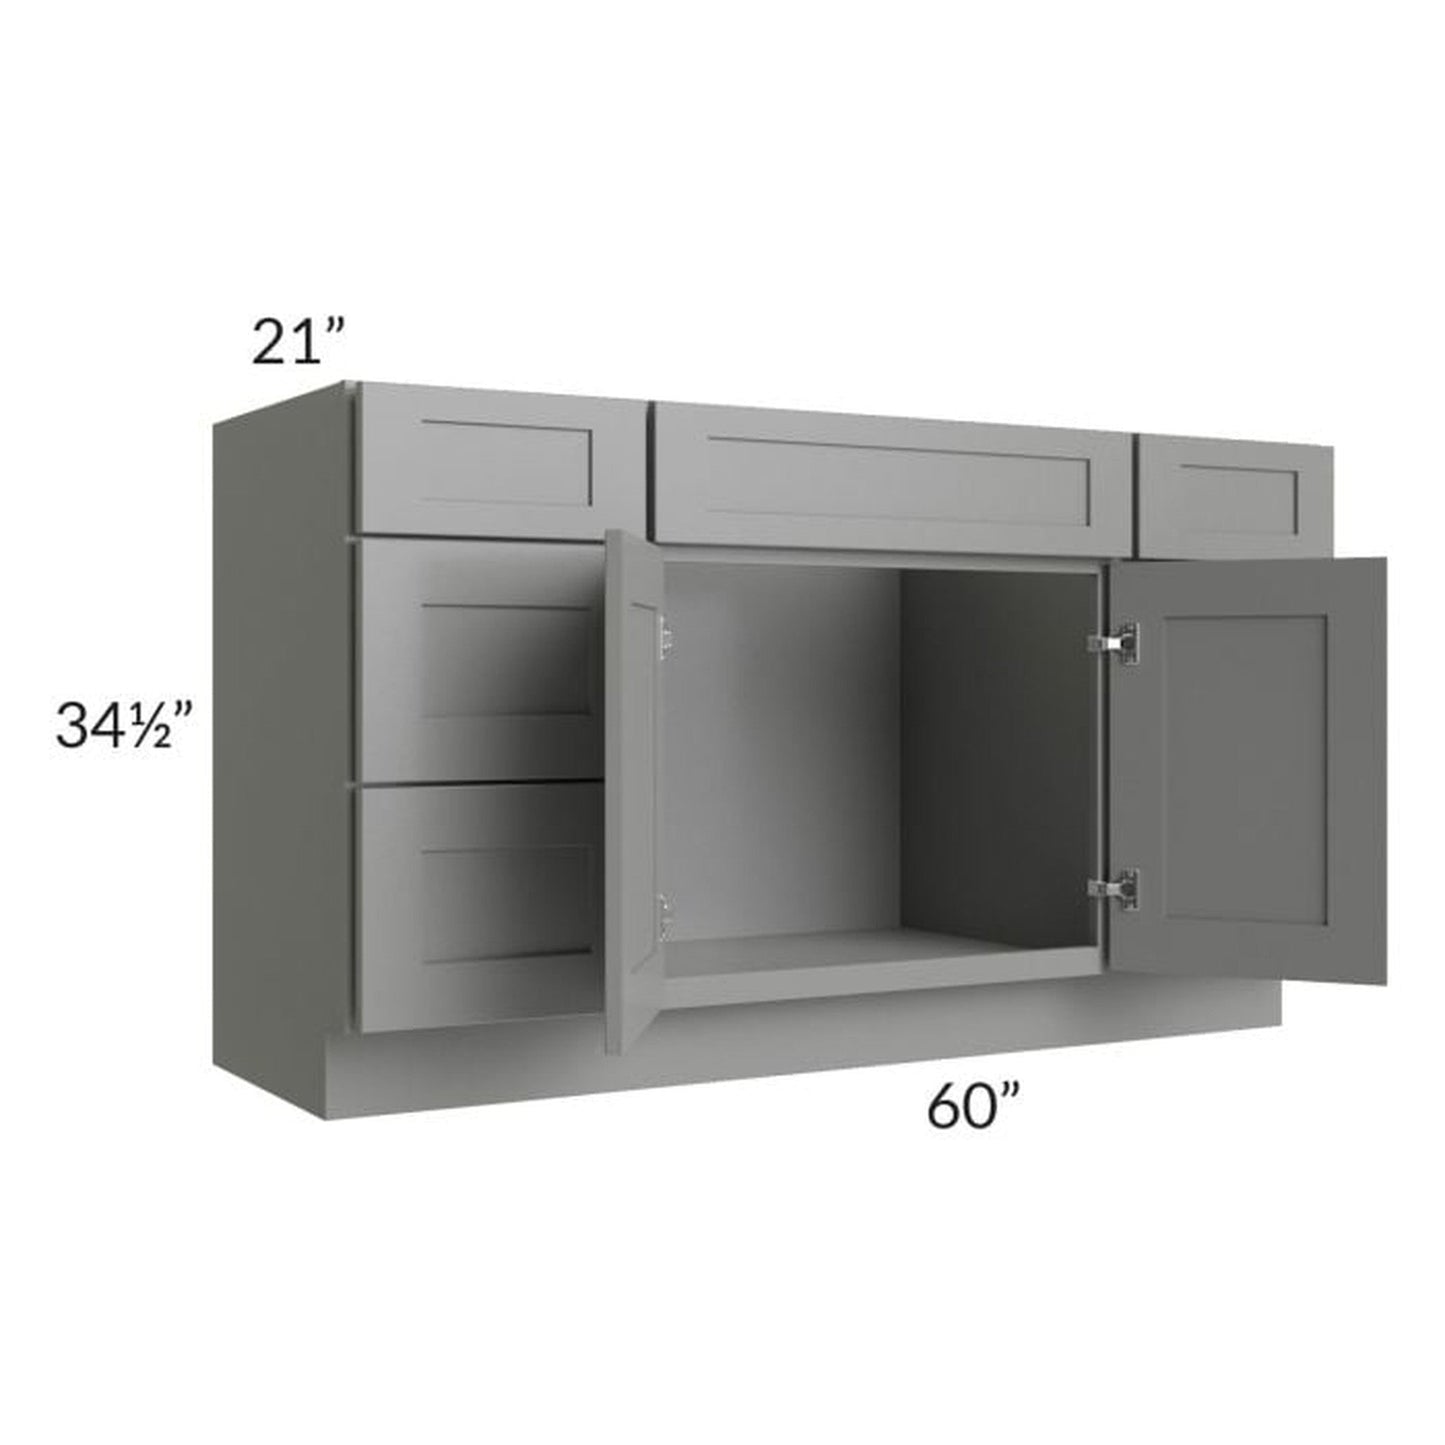 RTA Shale Grey Shaker 60" Vanity Sink Base Cabinet PS-V6021DD with Drawers with 1 Decorative End Panel